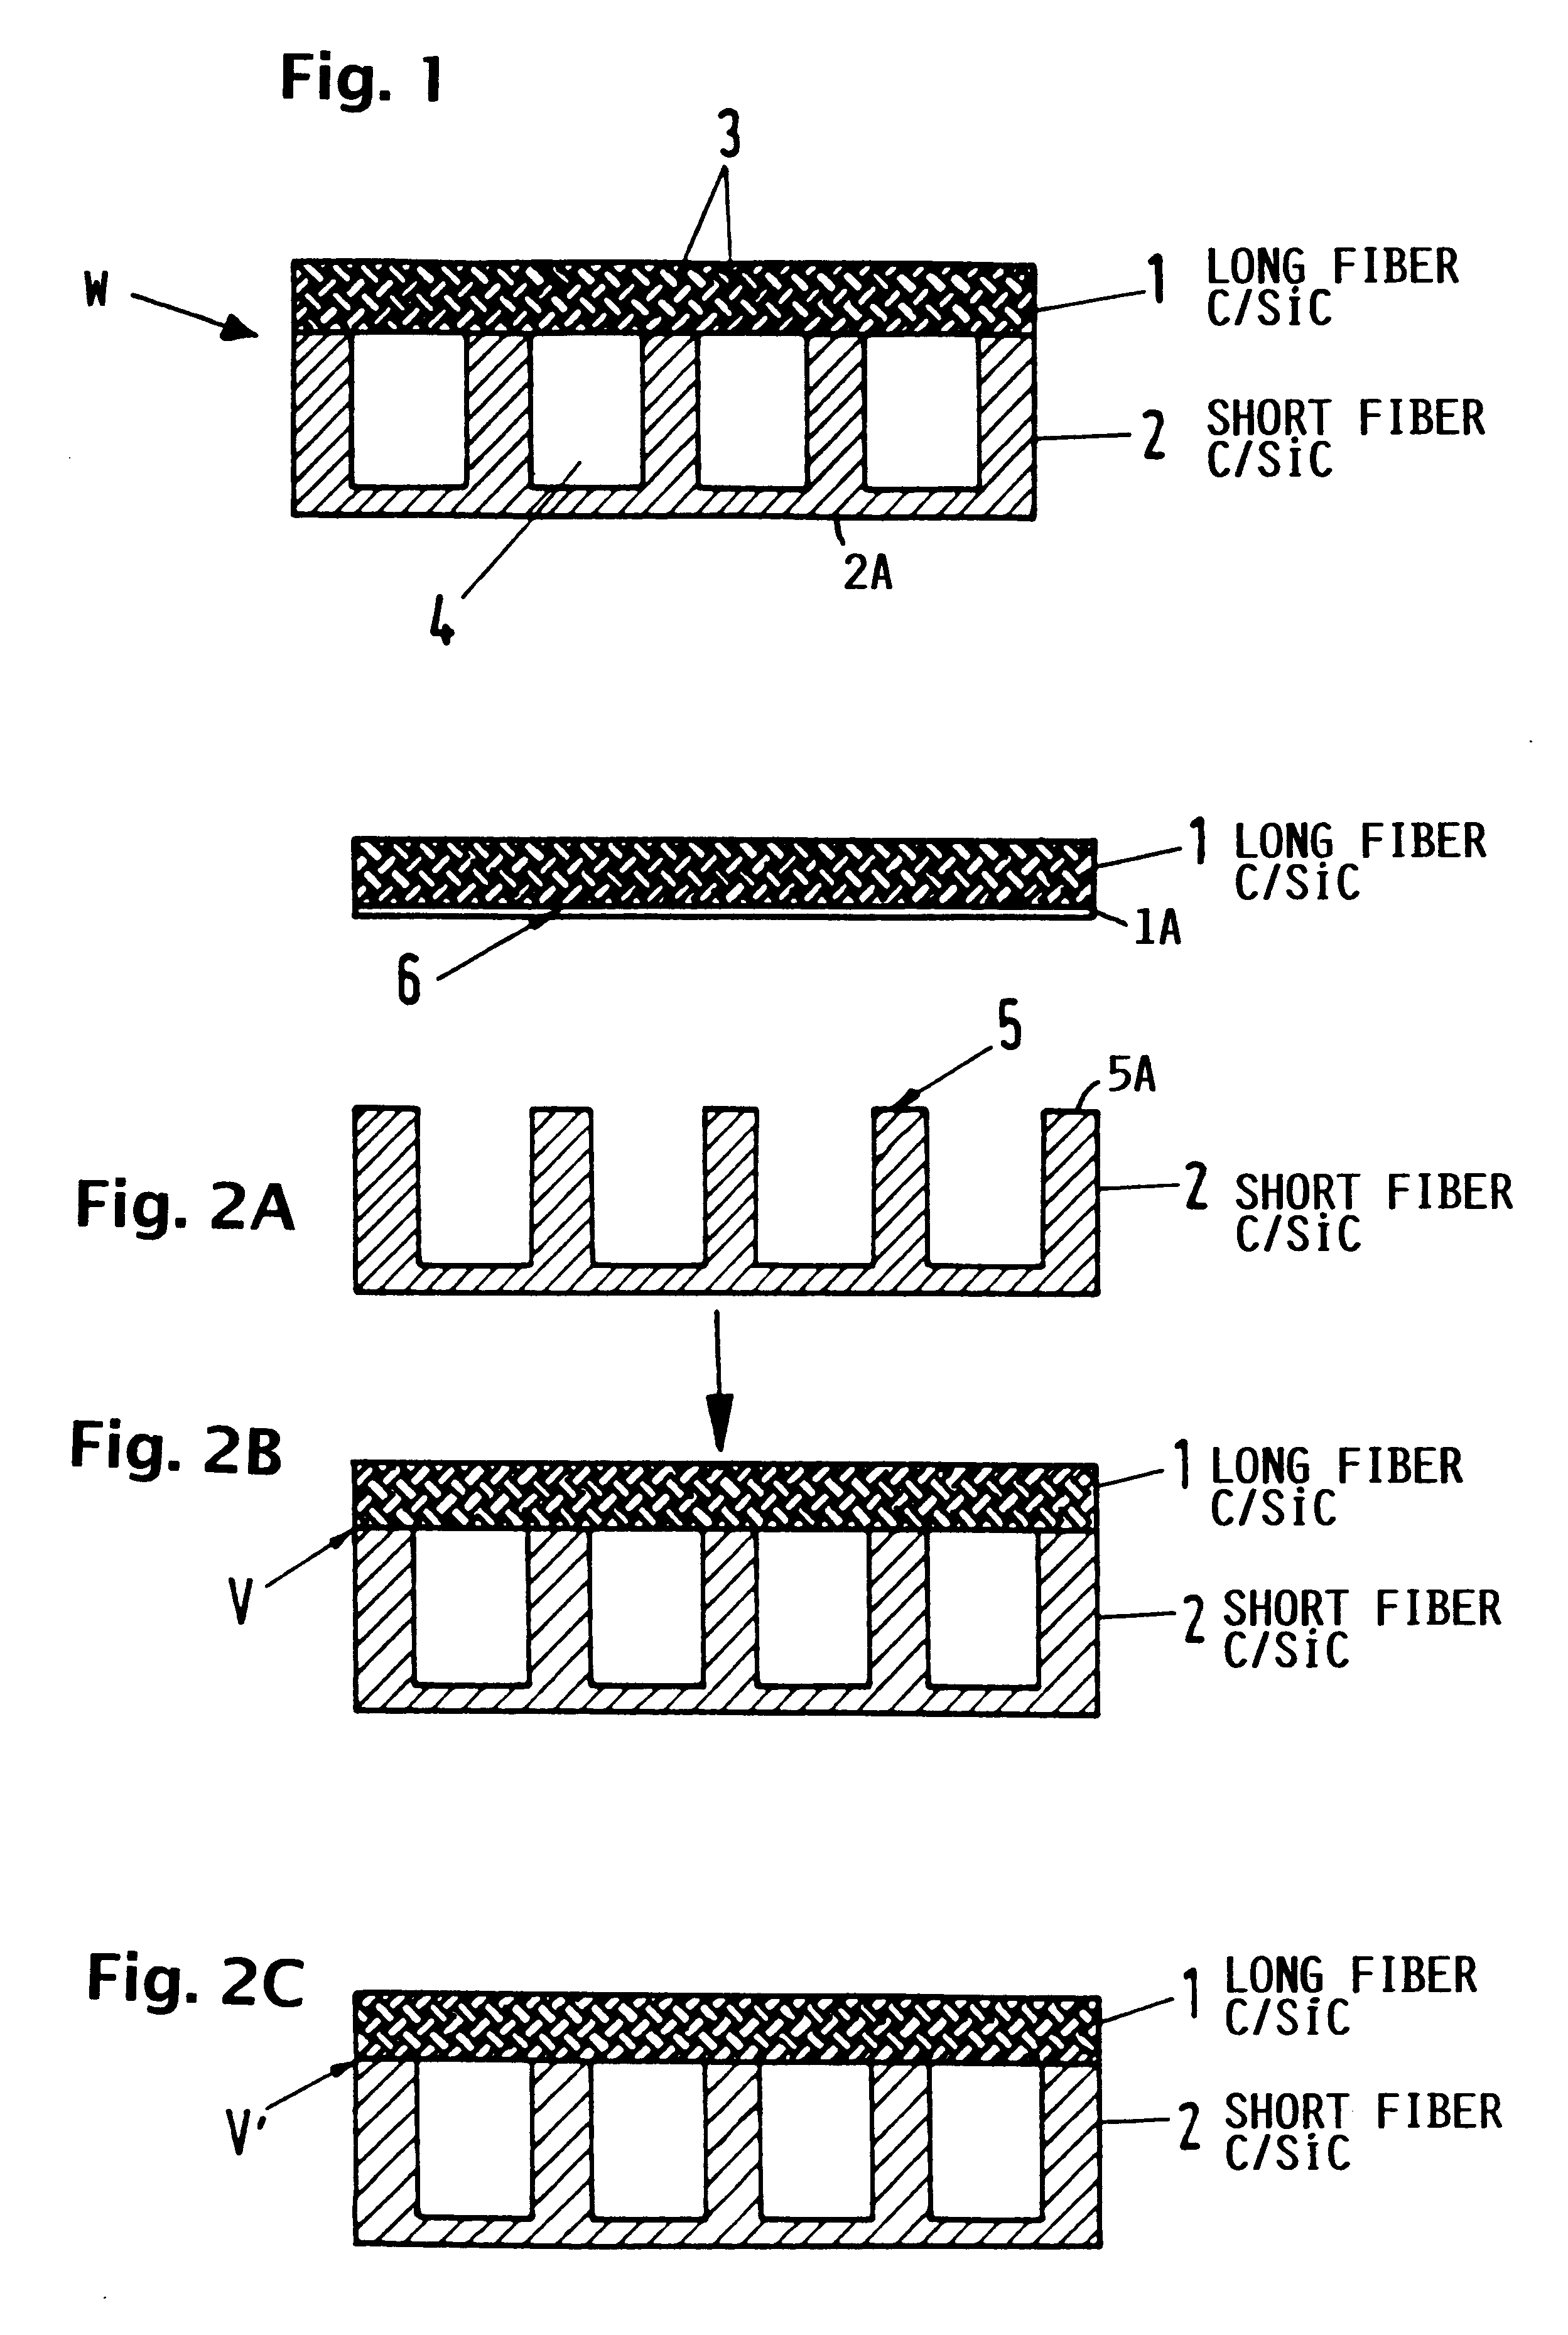 Combustion chamber wall construction for high power engines and thrust nozzles